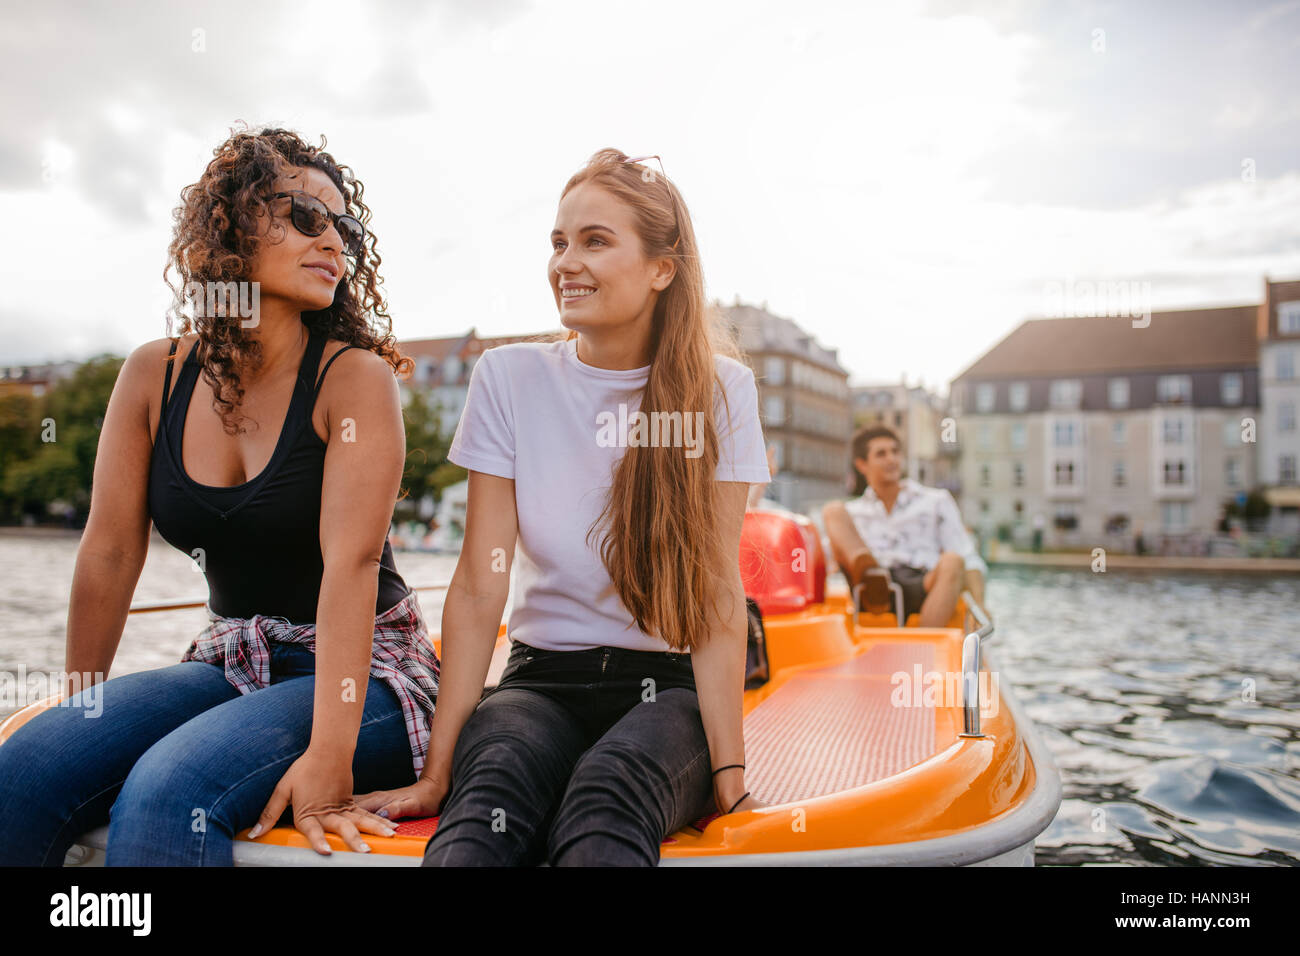 Shot of teenage women sitting on pedal boat with a man in background. Happy young friends enjoying boating in the lake. Stock Photo